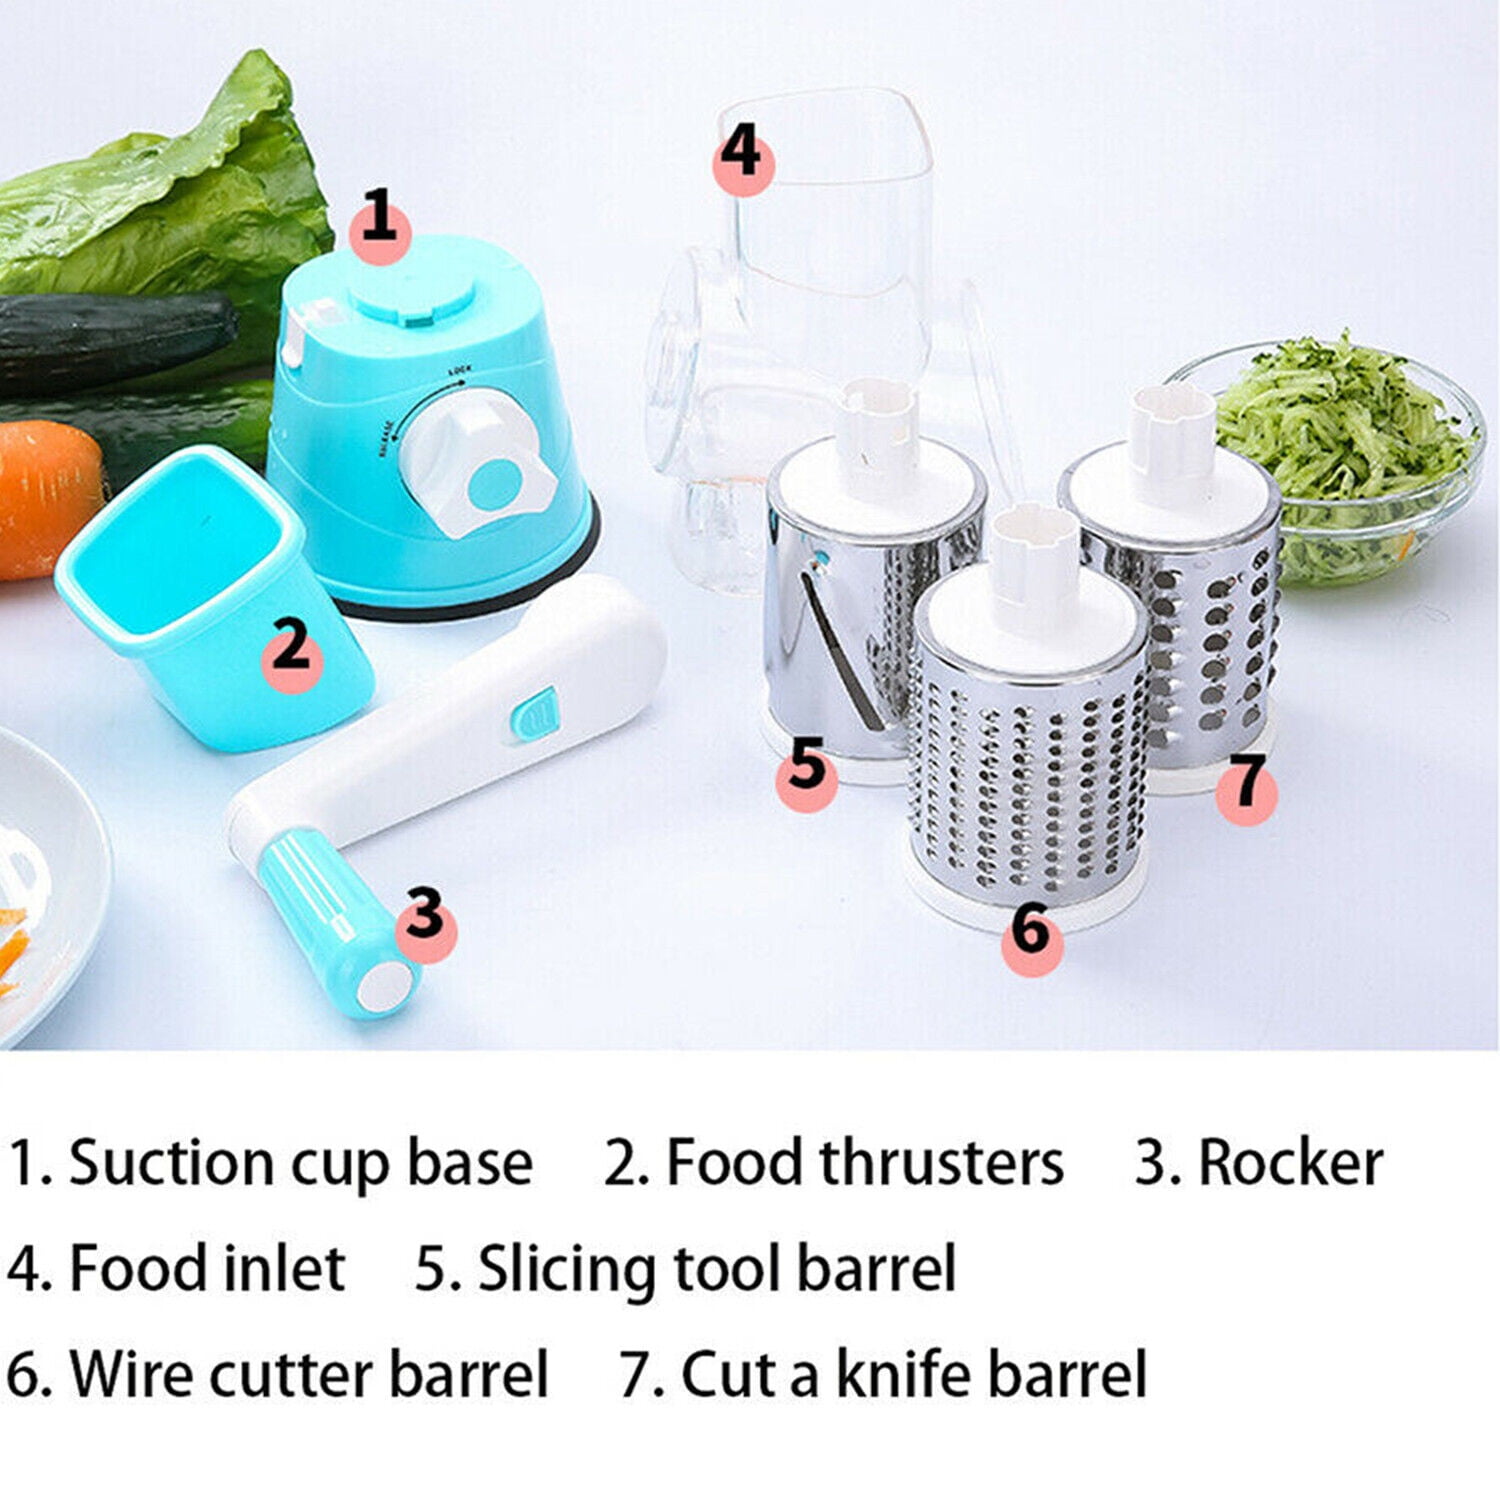 1pc Rotary Cheese Grater Shredder Chopper Round Tumbling Box Mandoline  Slicer Nut Grinder Vegetable Slicer, Hash Brown, Potato With Strong Suction  Base